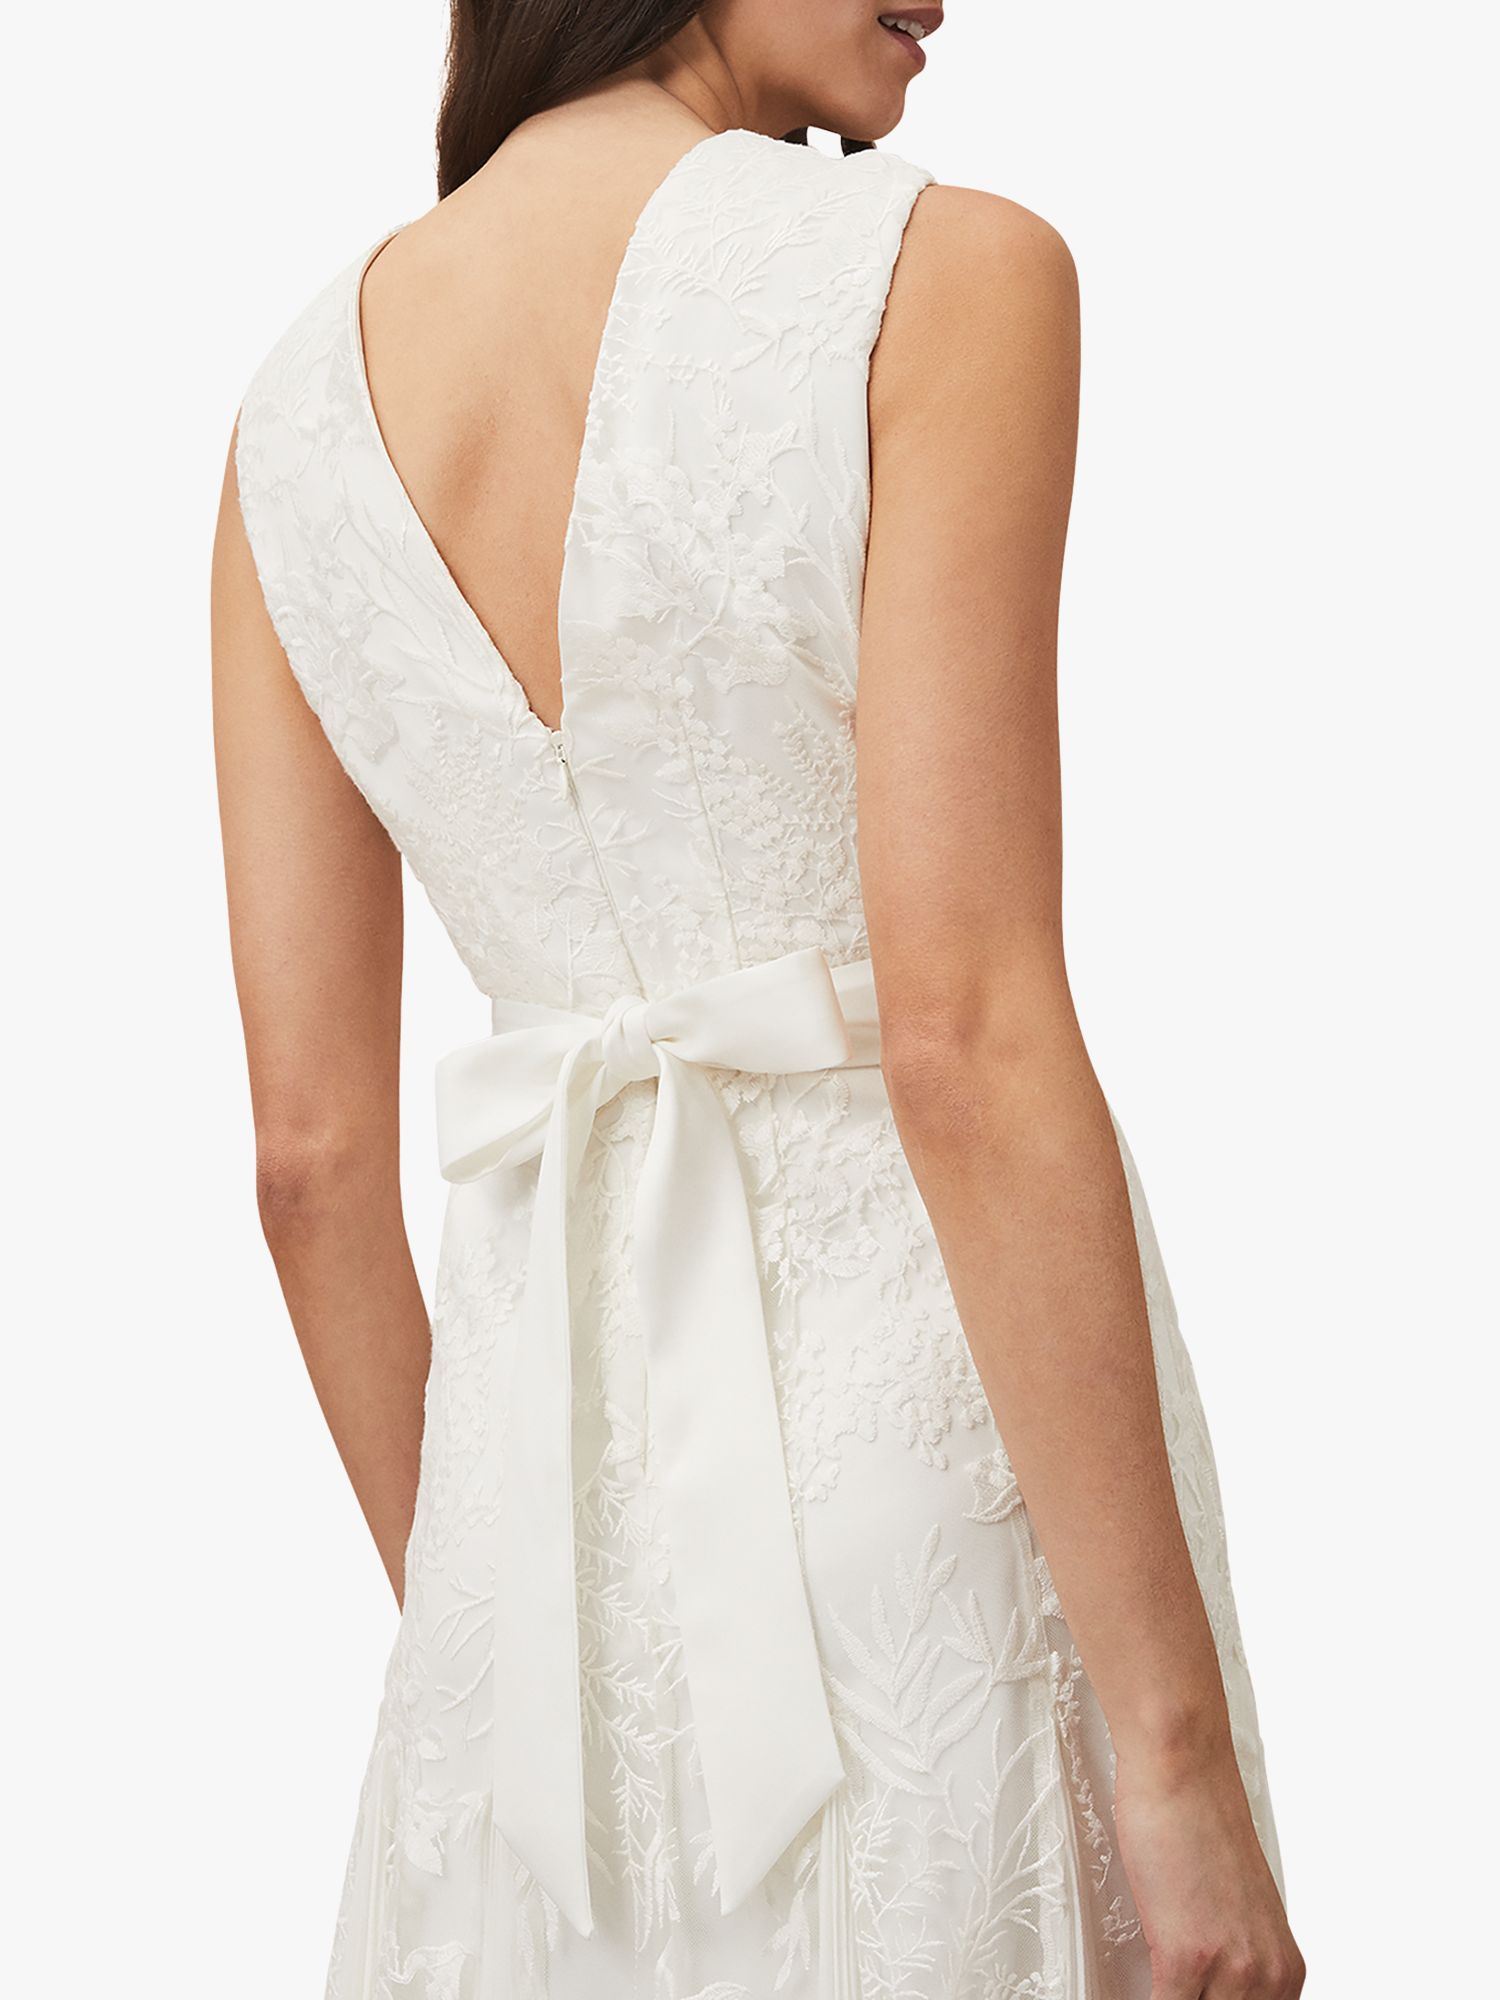 Buy Phase Eight Caterina Embroidered Wedding Dress, Pale Cream Online at johnlewis.com